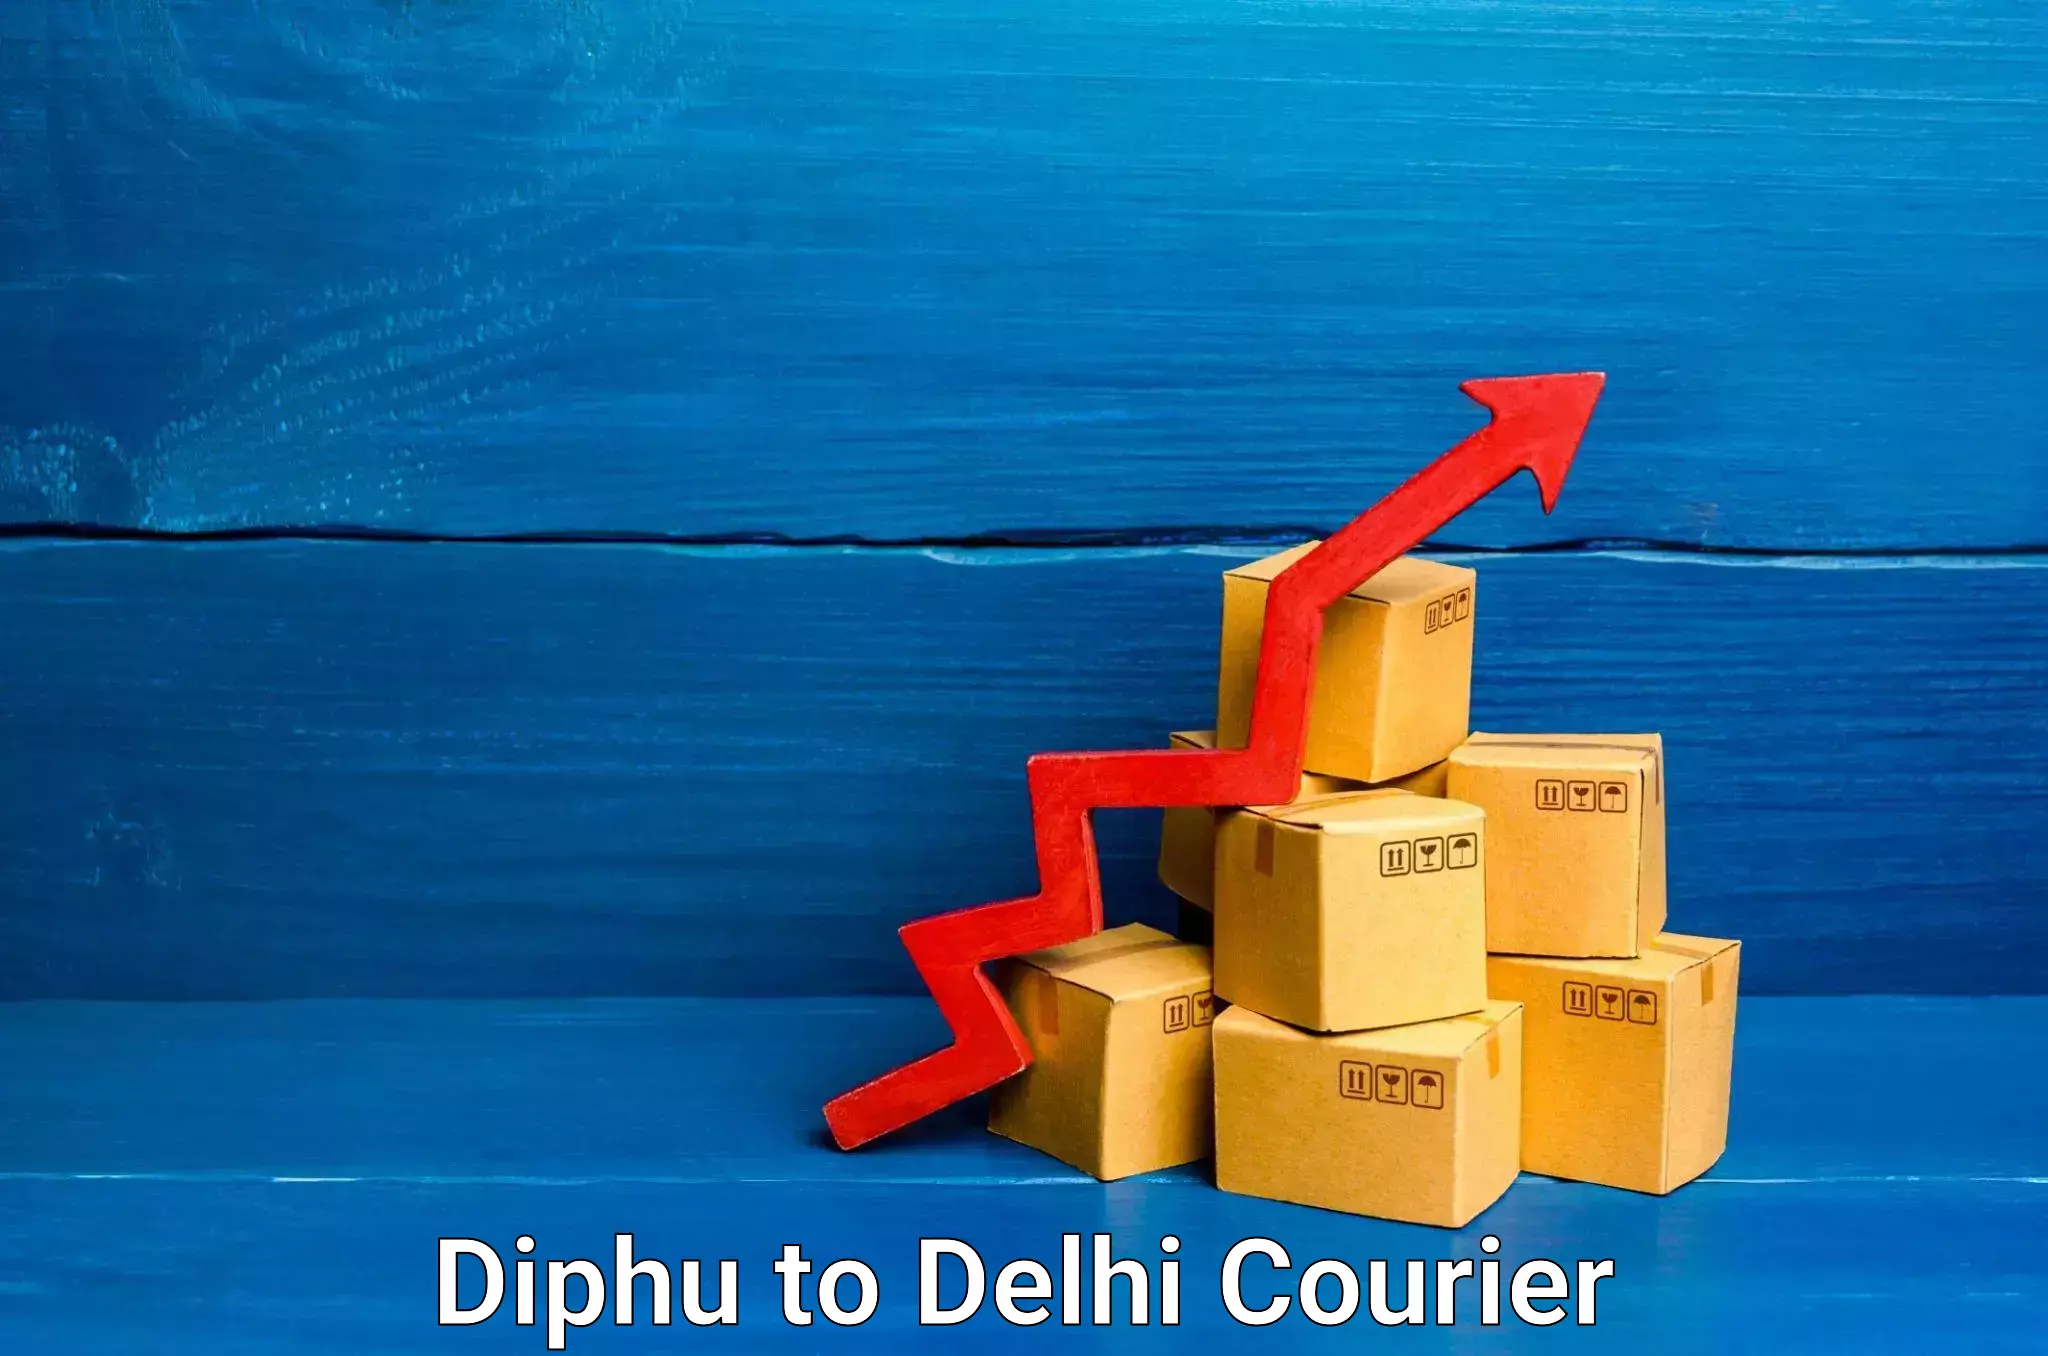 Reliable delivery network Diphu to Subhash Nagar